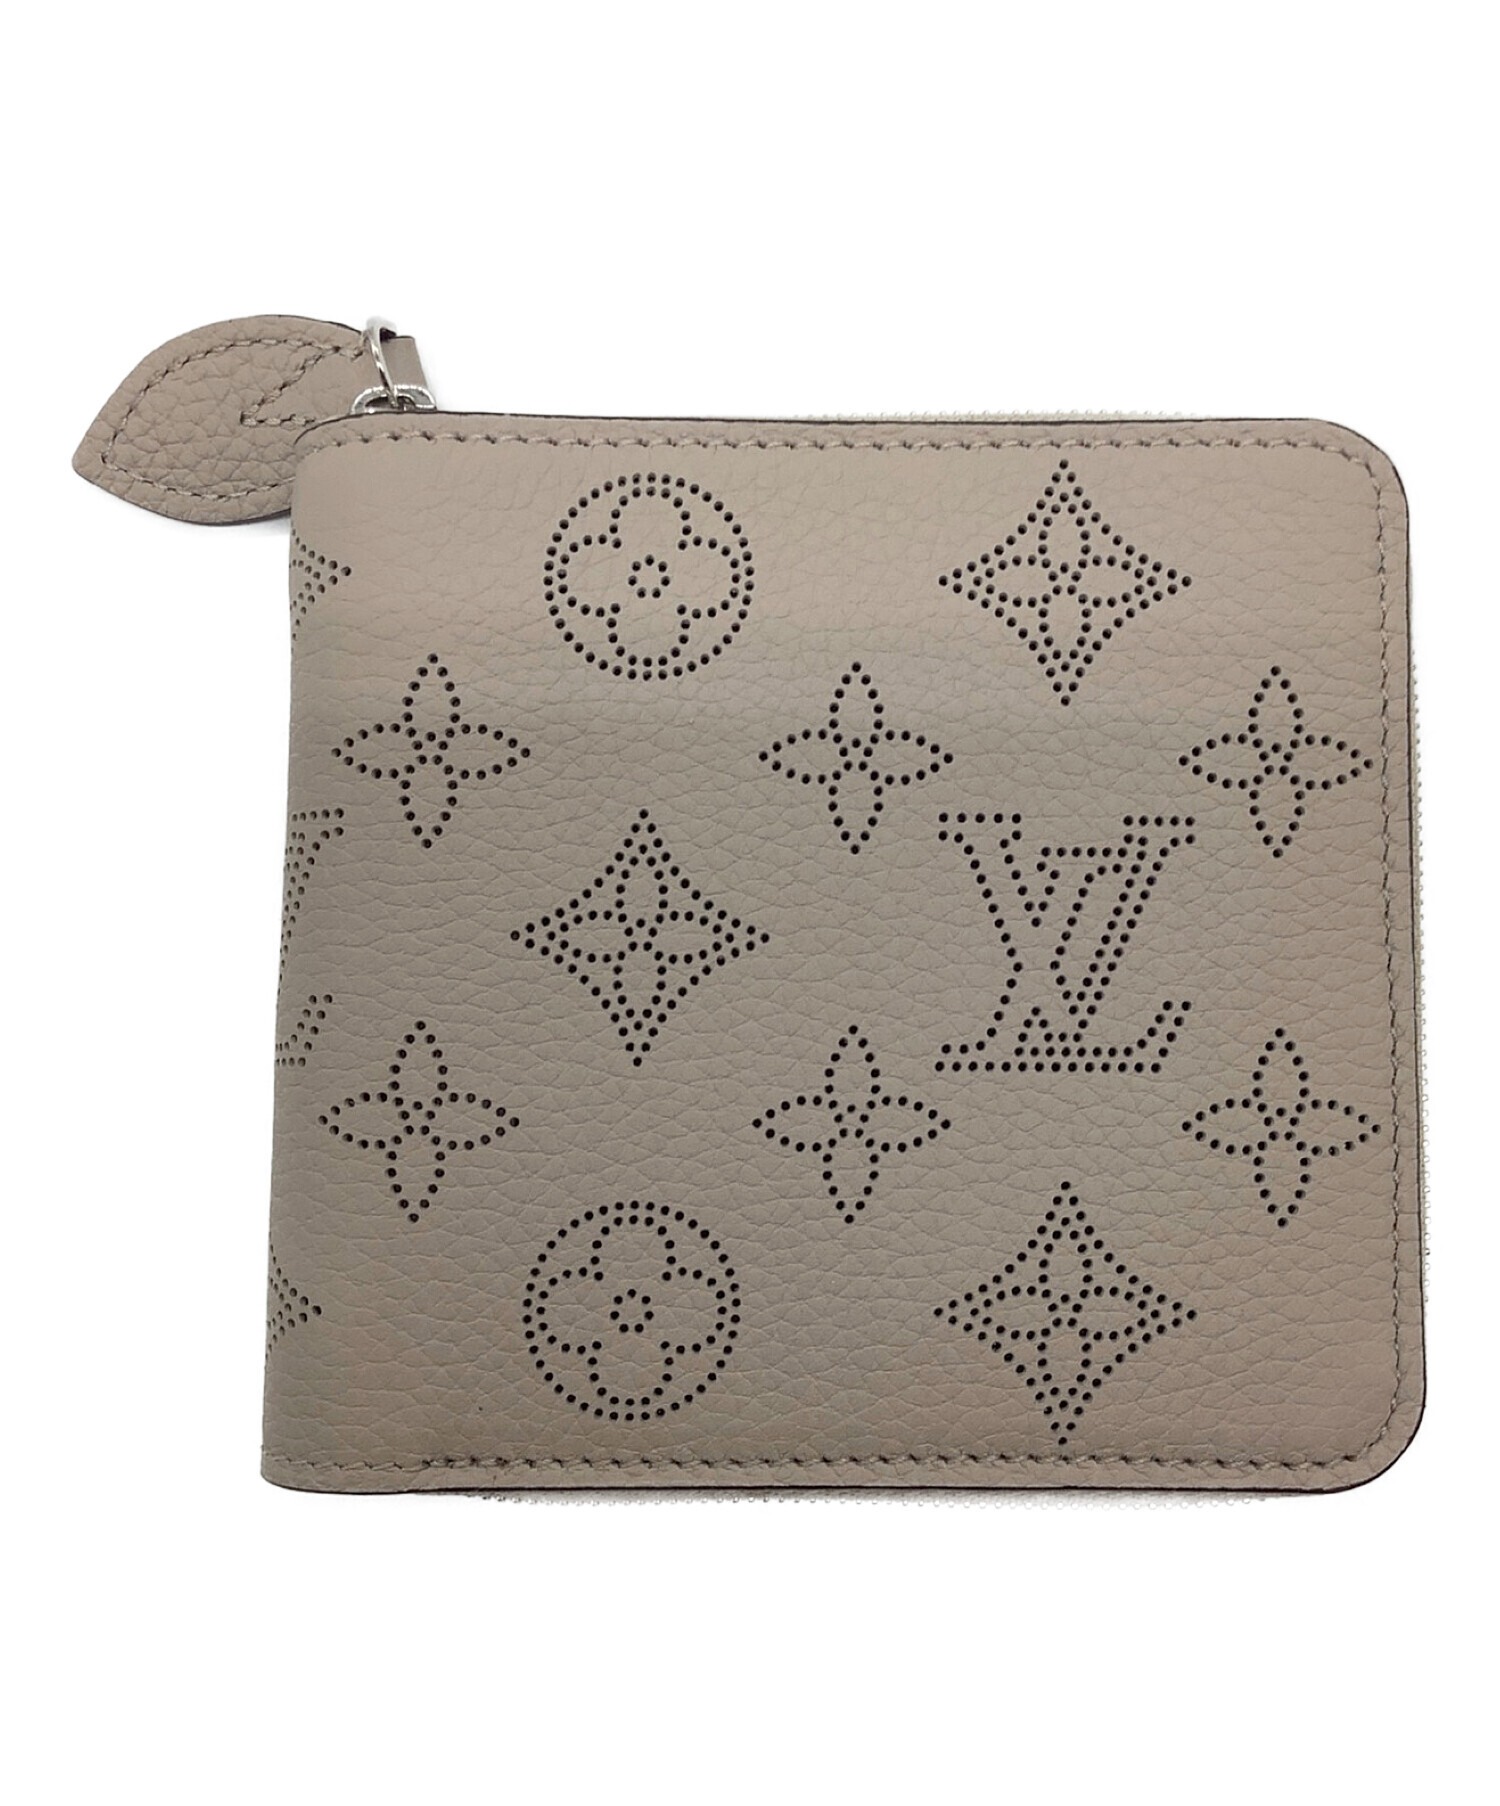 LOUIS VUITTON ジッピー・コンパクトウォレット